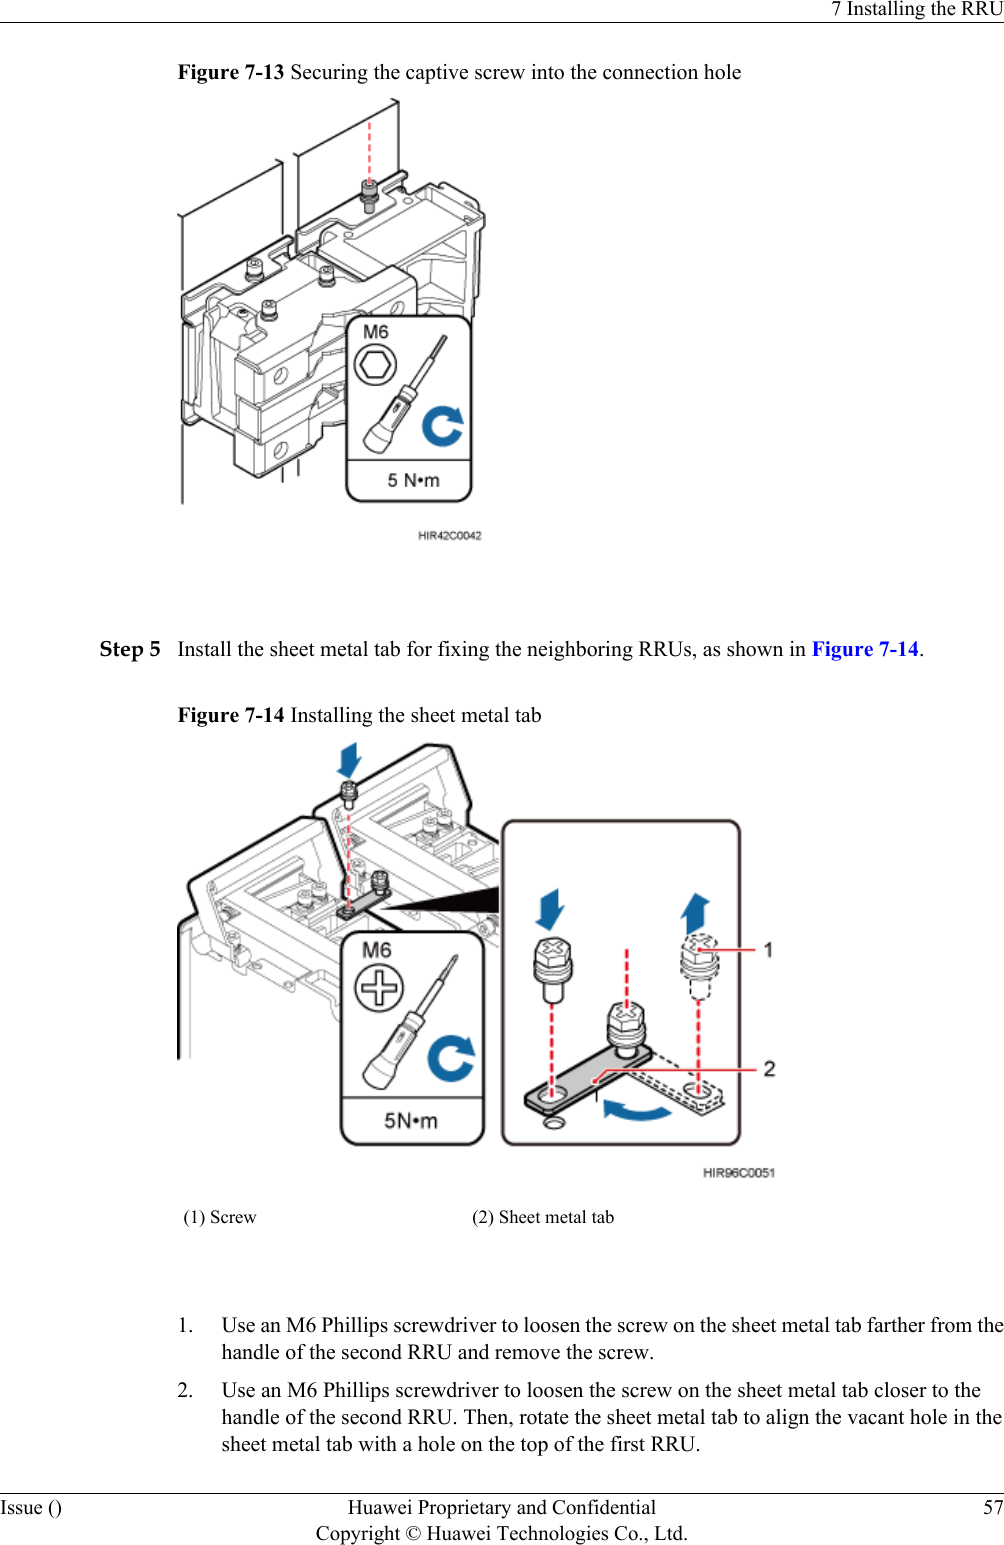 Figure 7-13 Securing the captive screw into the connection hole Step 5 Install the sheet metal tab for fixing the neighboring RRUs, as shown in Figure 7-14.Figure 7-14 Installing the sheet metal tab(1) Screw (2) Sheet metal tab 1. Use an M6 Phillips screwdriver to loosen the screw on the sheet metal tab farther from thehandle of the second RRU and remove the screw.2. Use an M6 Phillips screwdriver to loosen the screw on the sheet metal tab closer to thehandle of the second RRU. Then, rotate the sheet metal tab to align the vacant hole in thesheet metal tab with a hole on the top of the first RRU.7 Installing the RRUIssue () Huawei Proprietary and ConfidentialCopyright © Huawei Technologies Co., Ltd.57